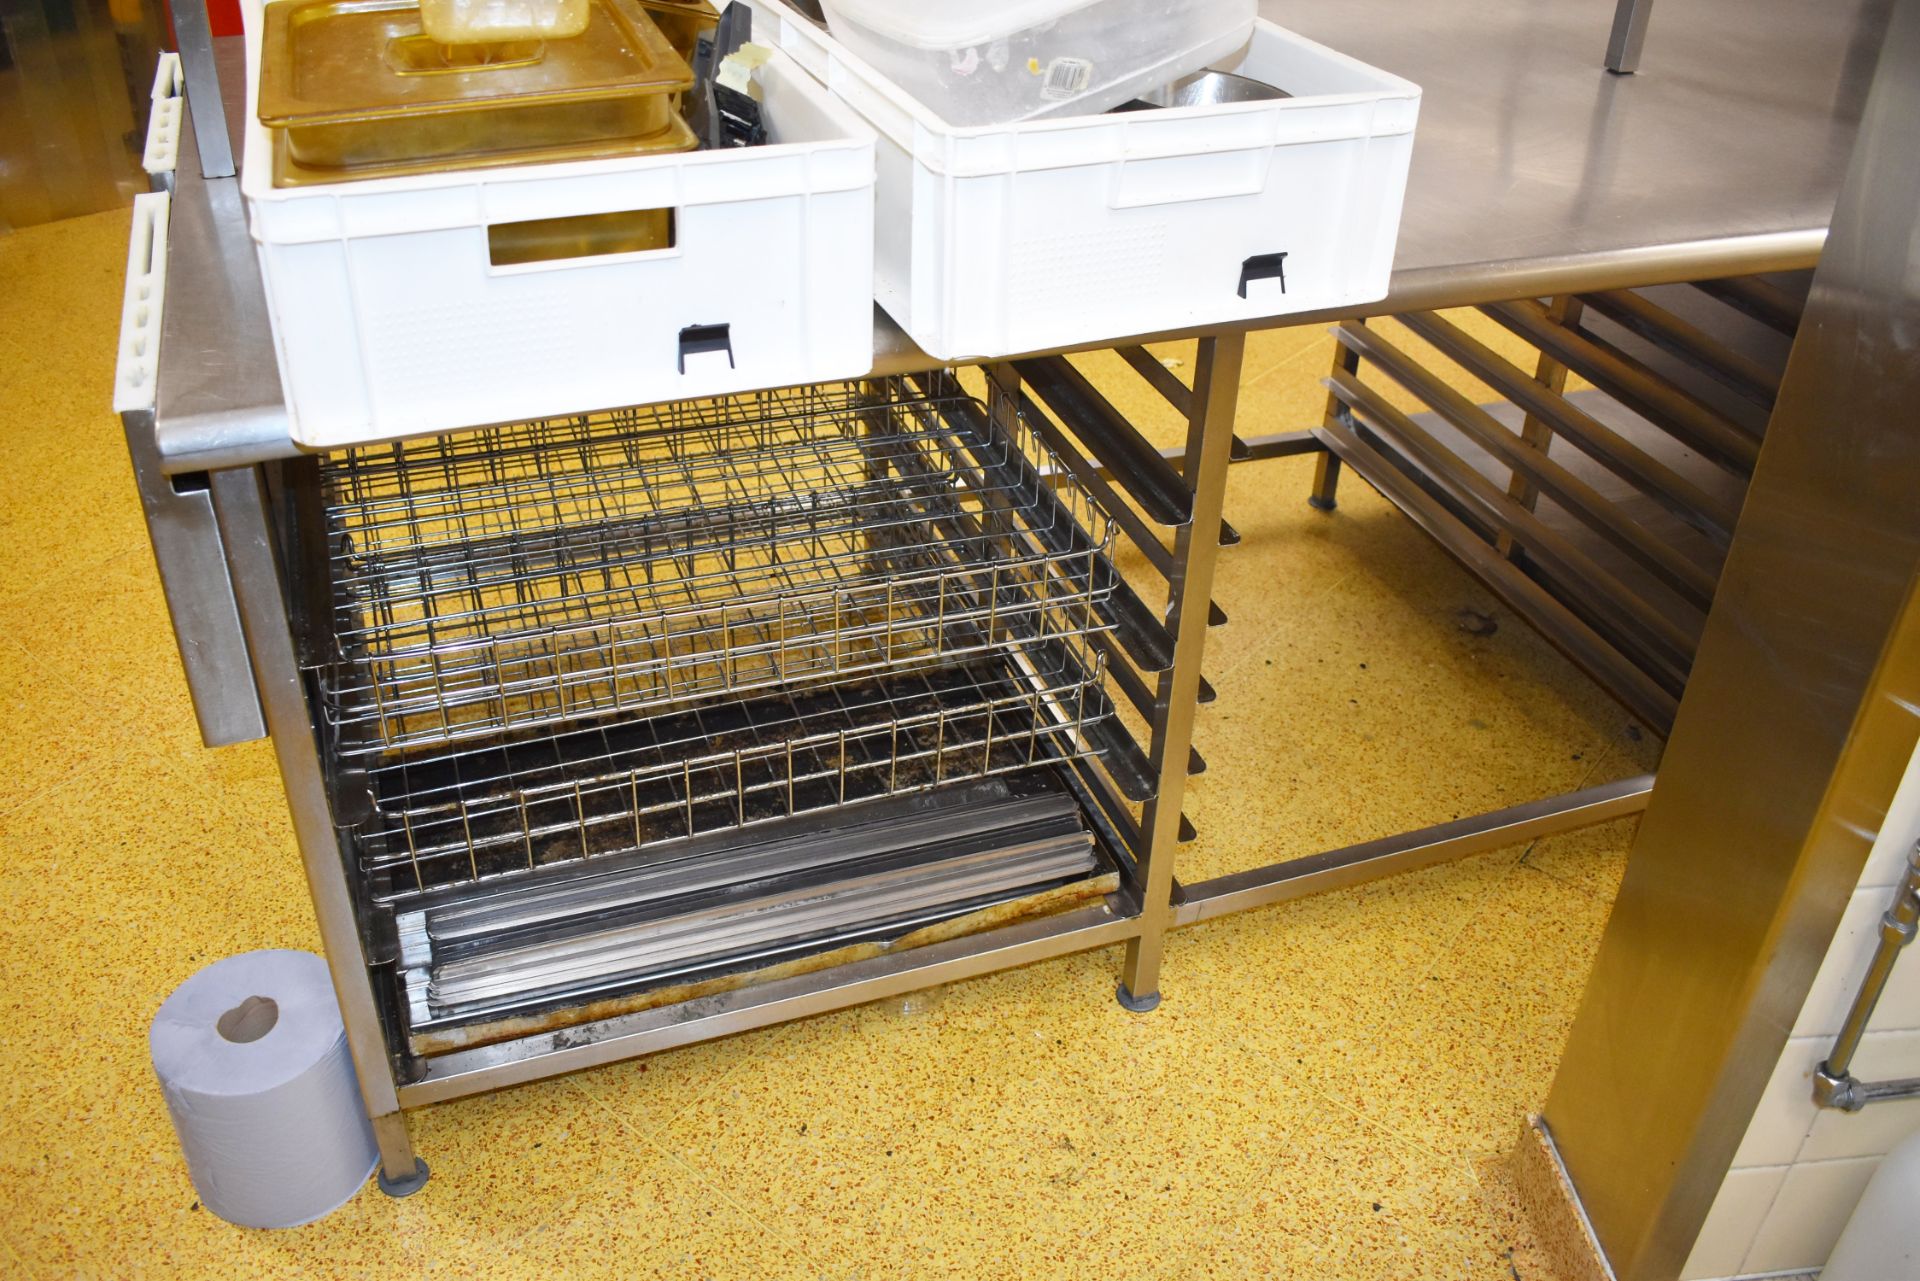 1 x Stainless Steel Commercial Kitchen Island - 10 x 4ft - Features Overhead Gastro Pan Holders, - Image 7 of 10